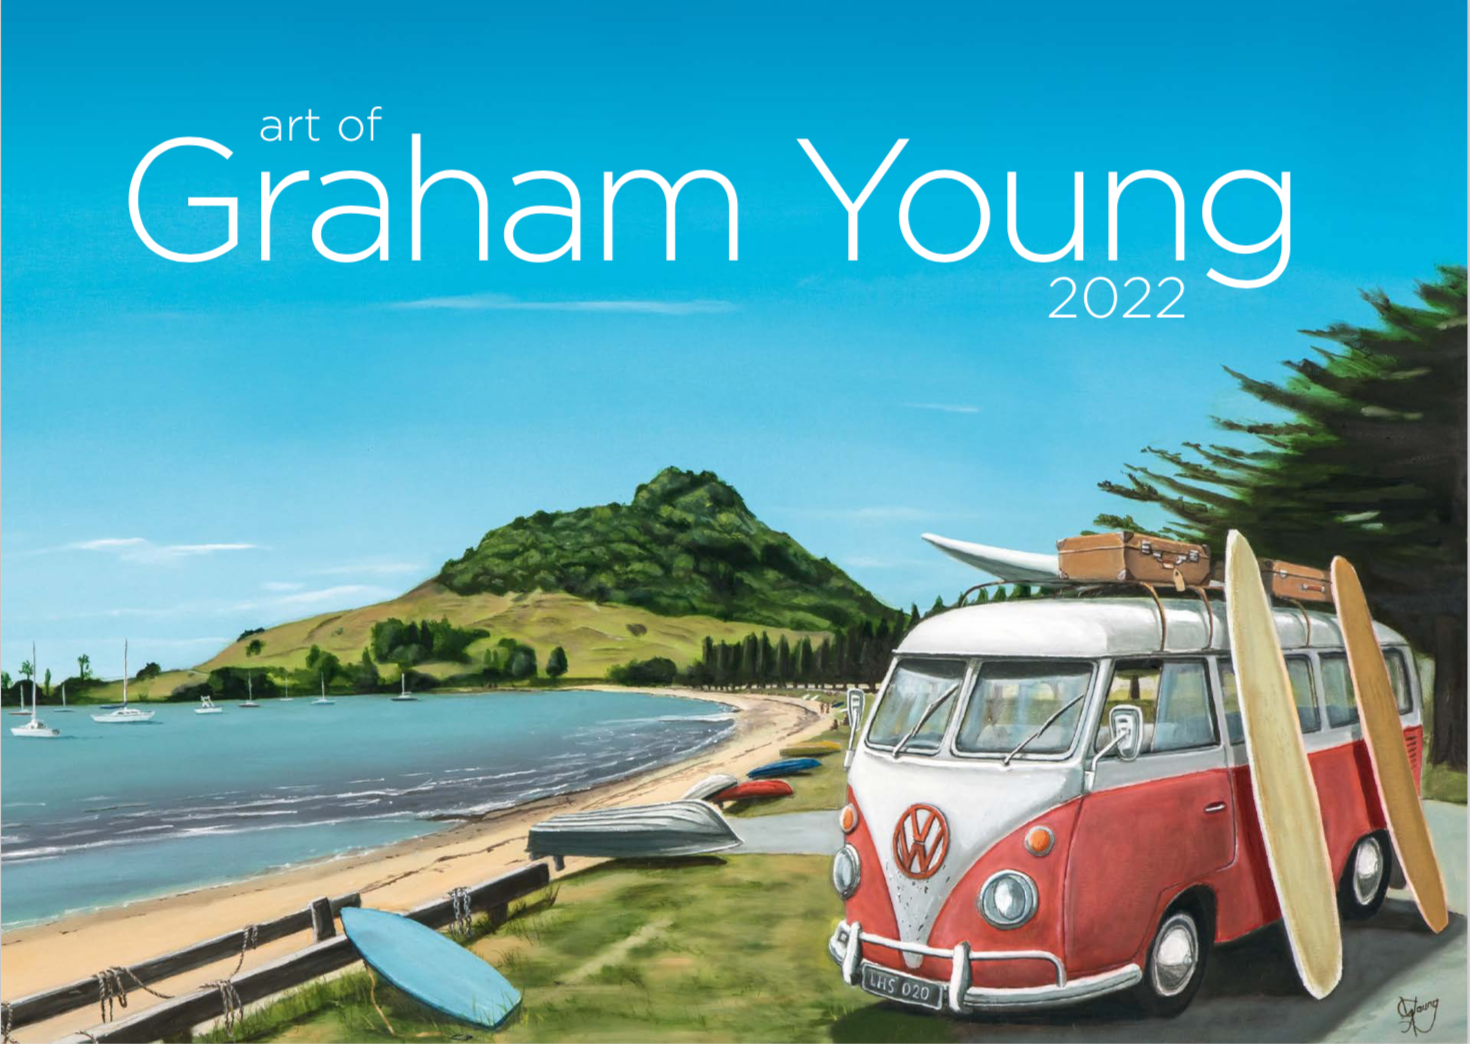 Art of Graham Young - 2022 Calendar - SOLD OUT